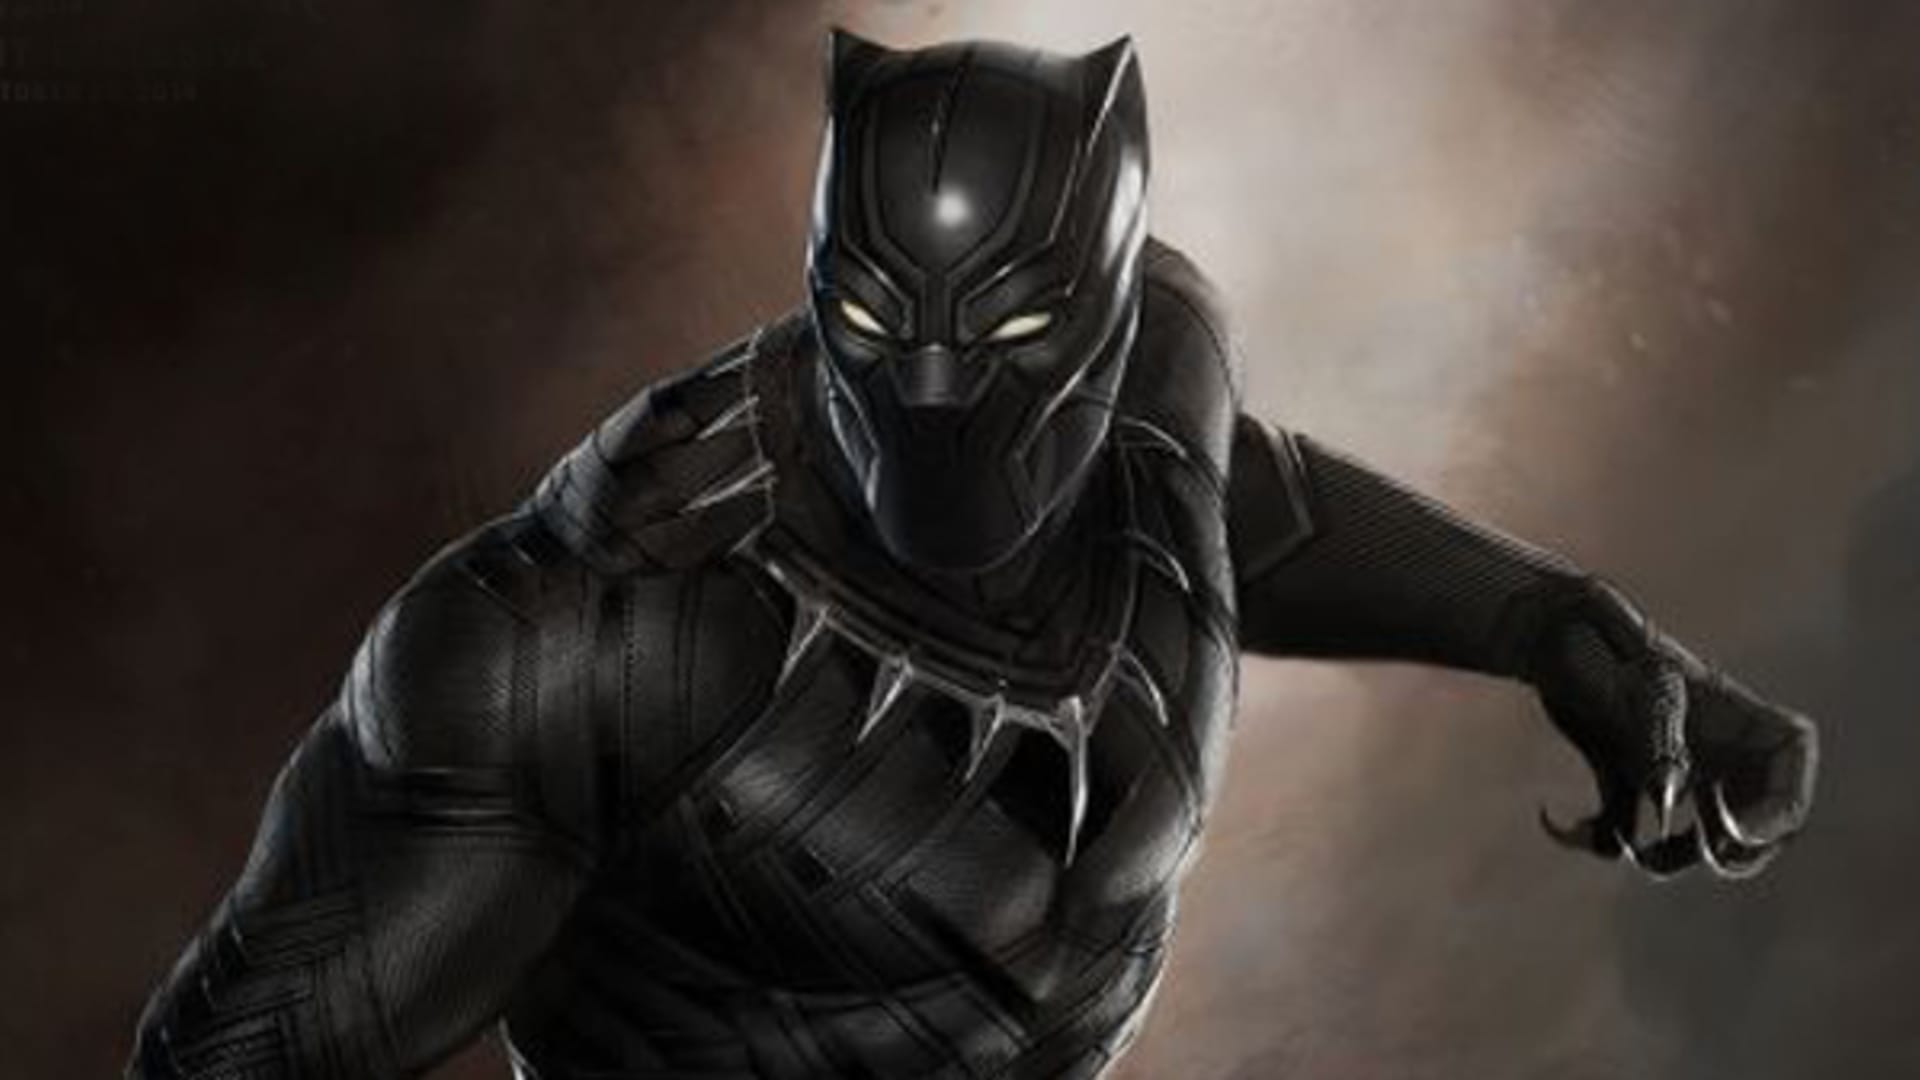 Black Panther' poised to smash records, usher Marvel into the future